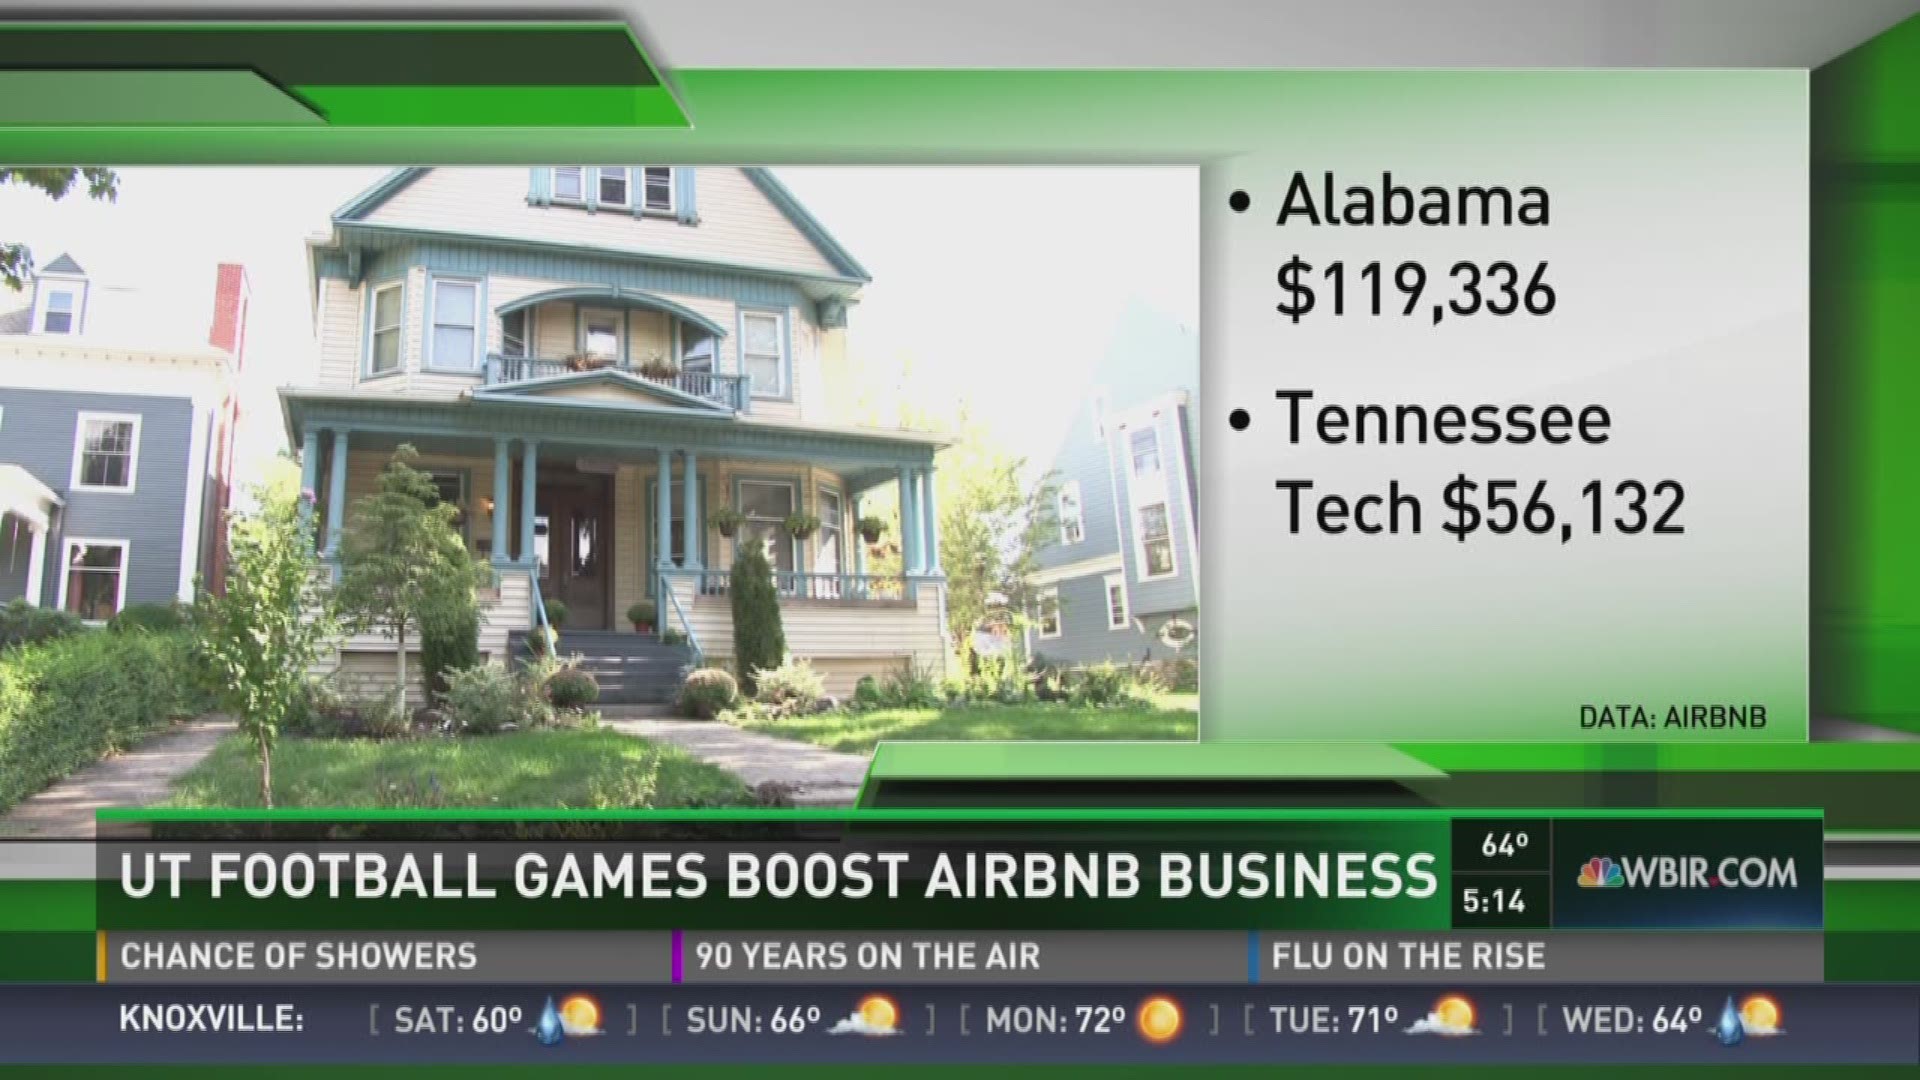 Feb. 17, 2017: Knoxville Airbnb users welcomed 3,400 guests last fall just on weekends with a home UT football game.